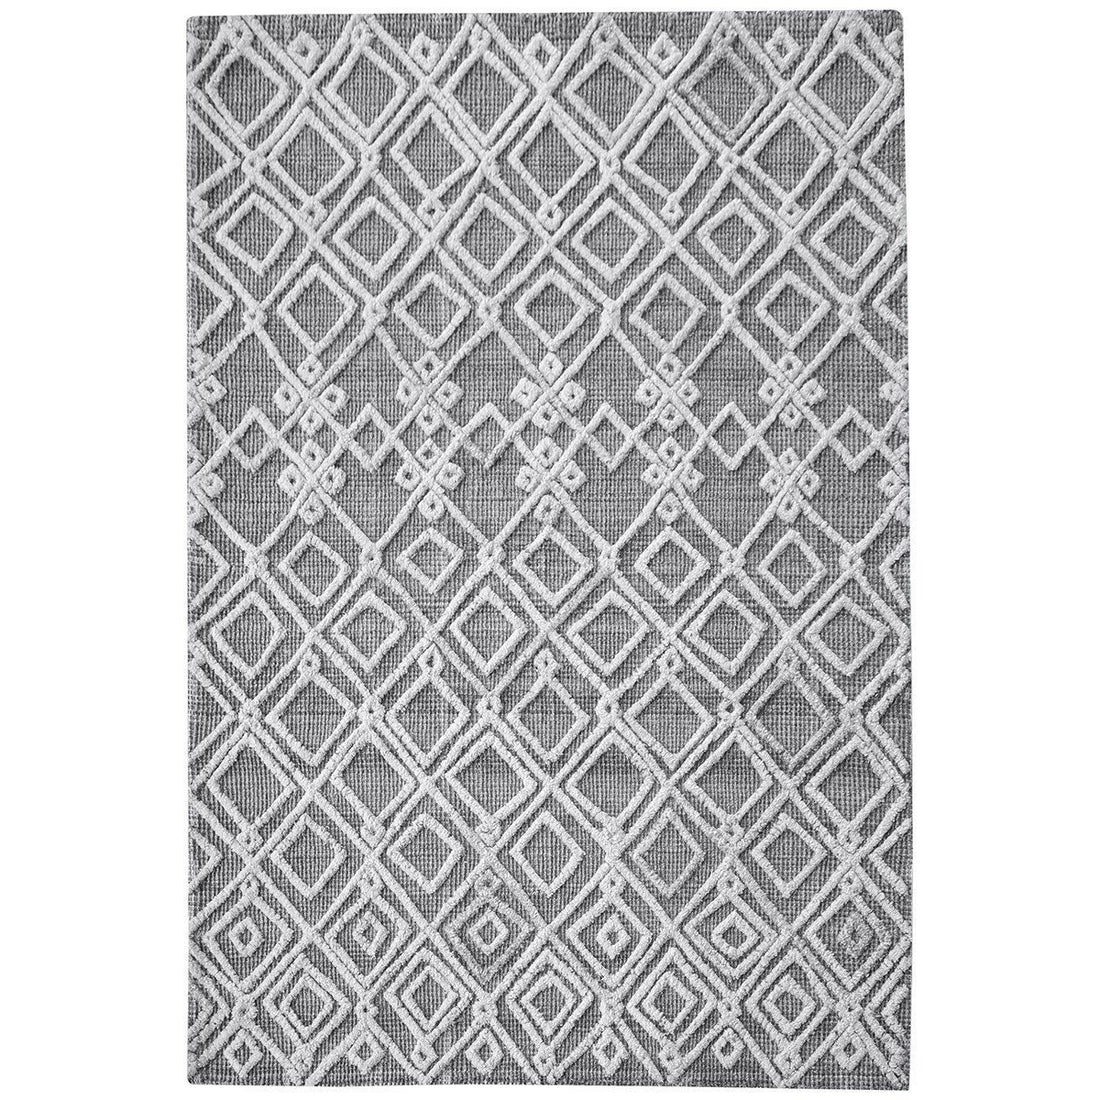 Uttermost Sieano Gray-Ivory Woven Natural Gray Wool Rug